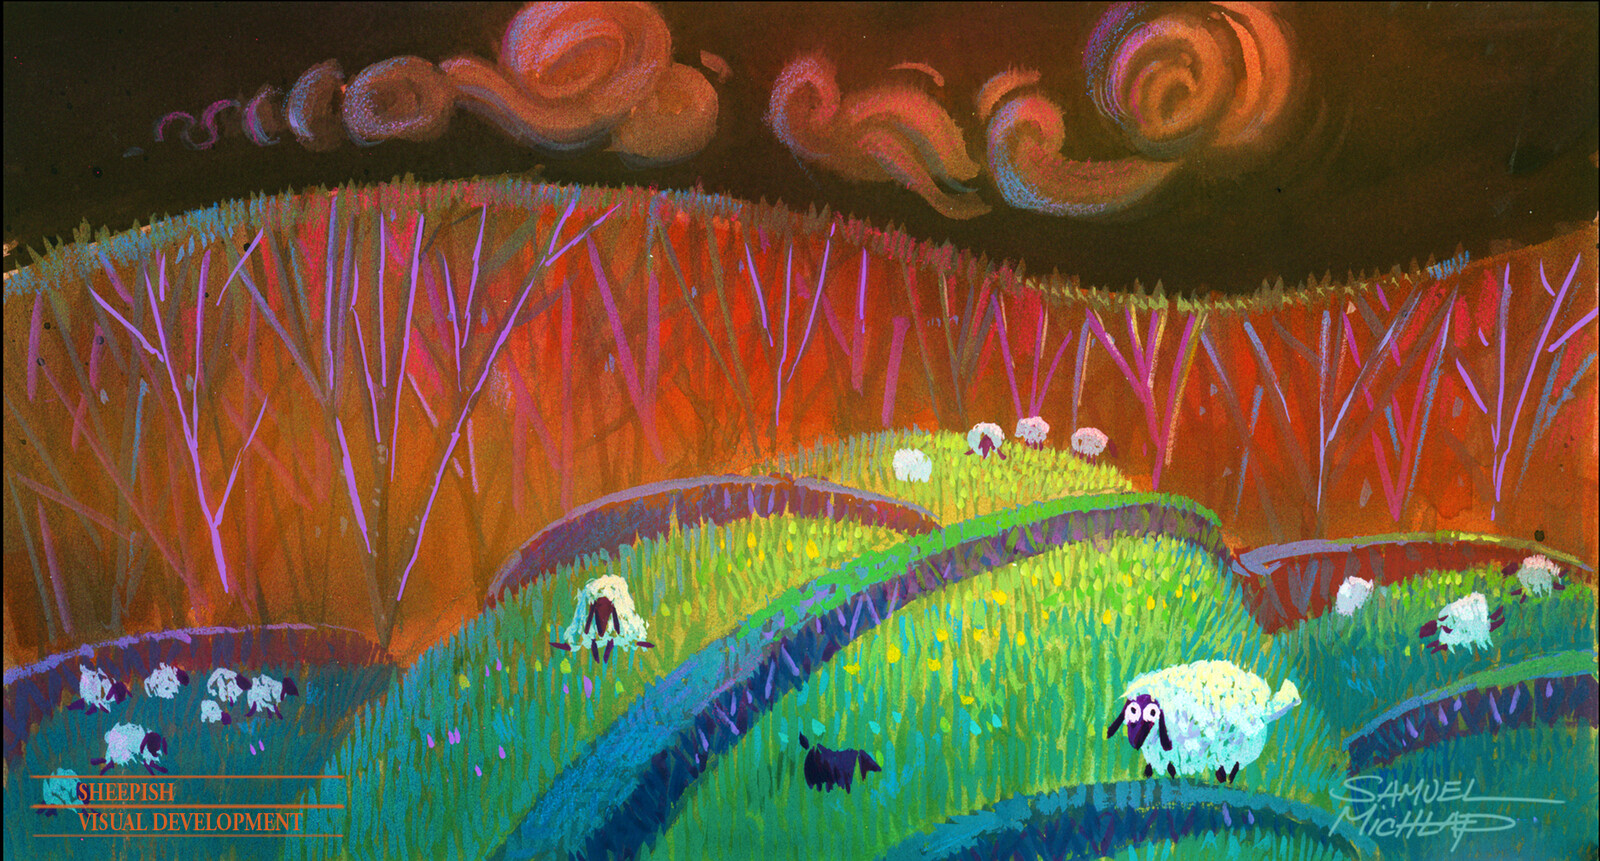 Hills in the shape of fluffy sheep. I was so interested in pushing the shapes and ideas.